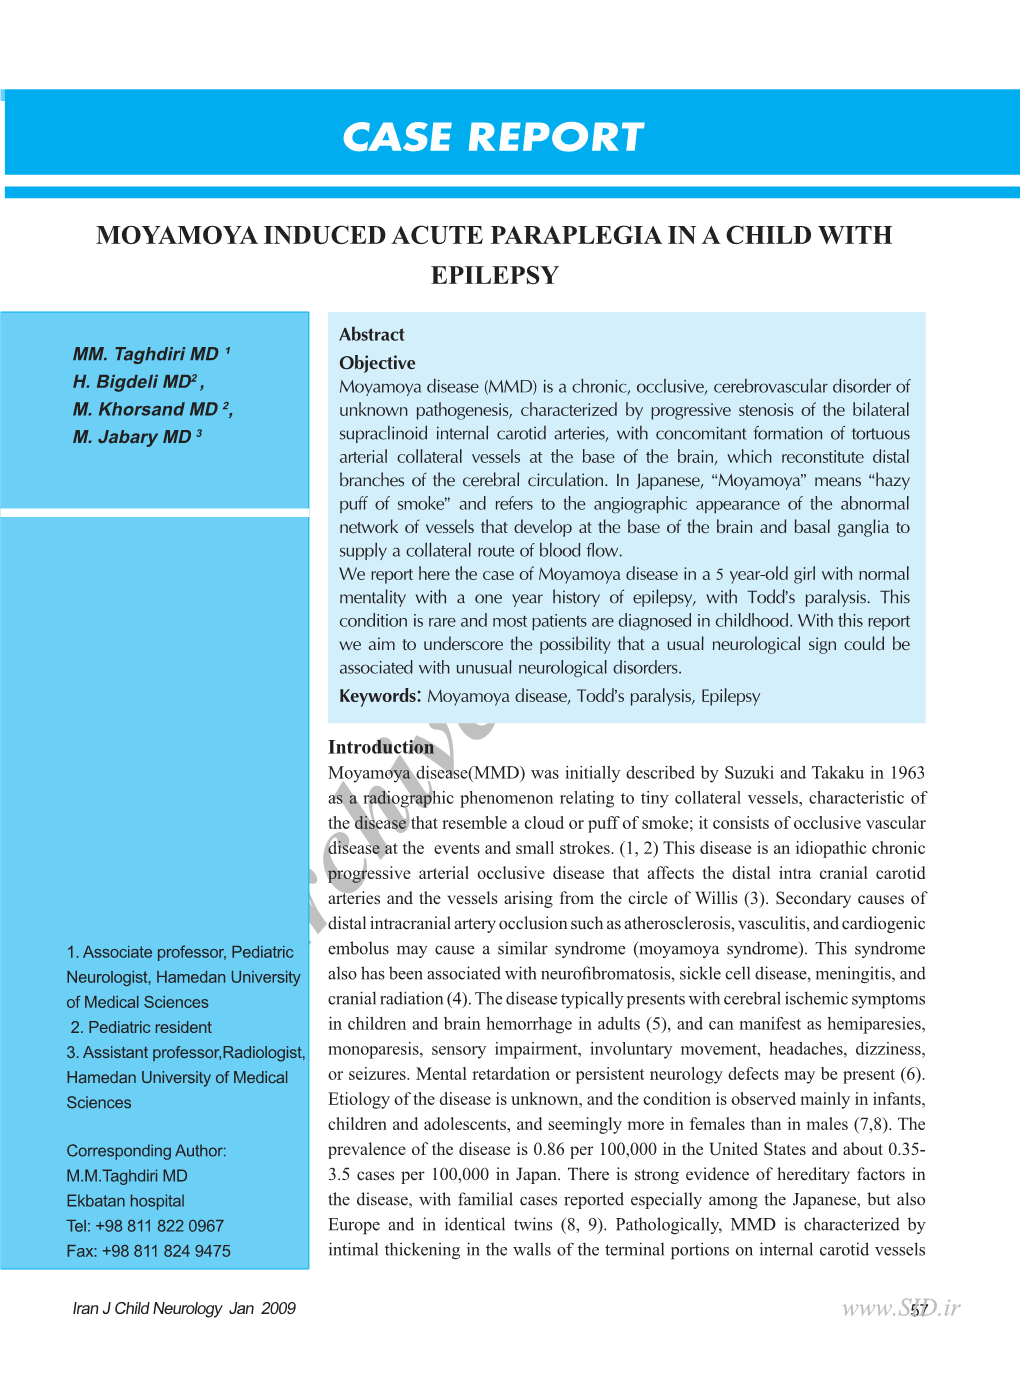 MOYAMOYA INDUCED ACUTE PARAPLEGIA in a CHILD with EPILEPSY Abstract MM